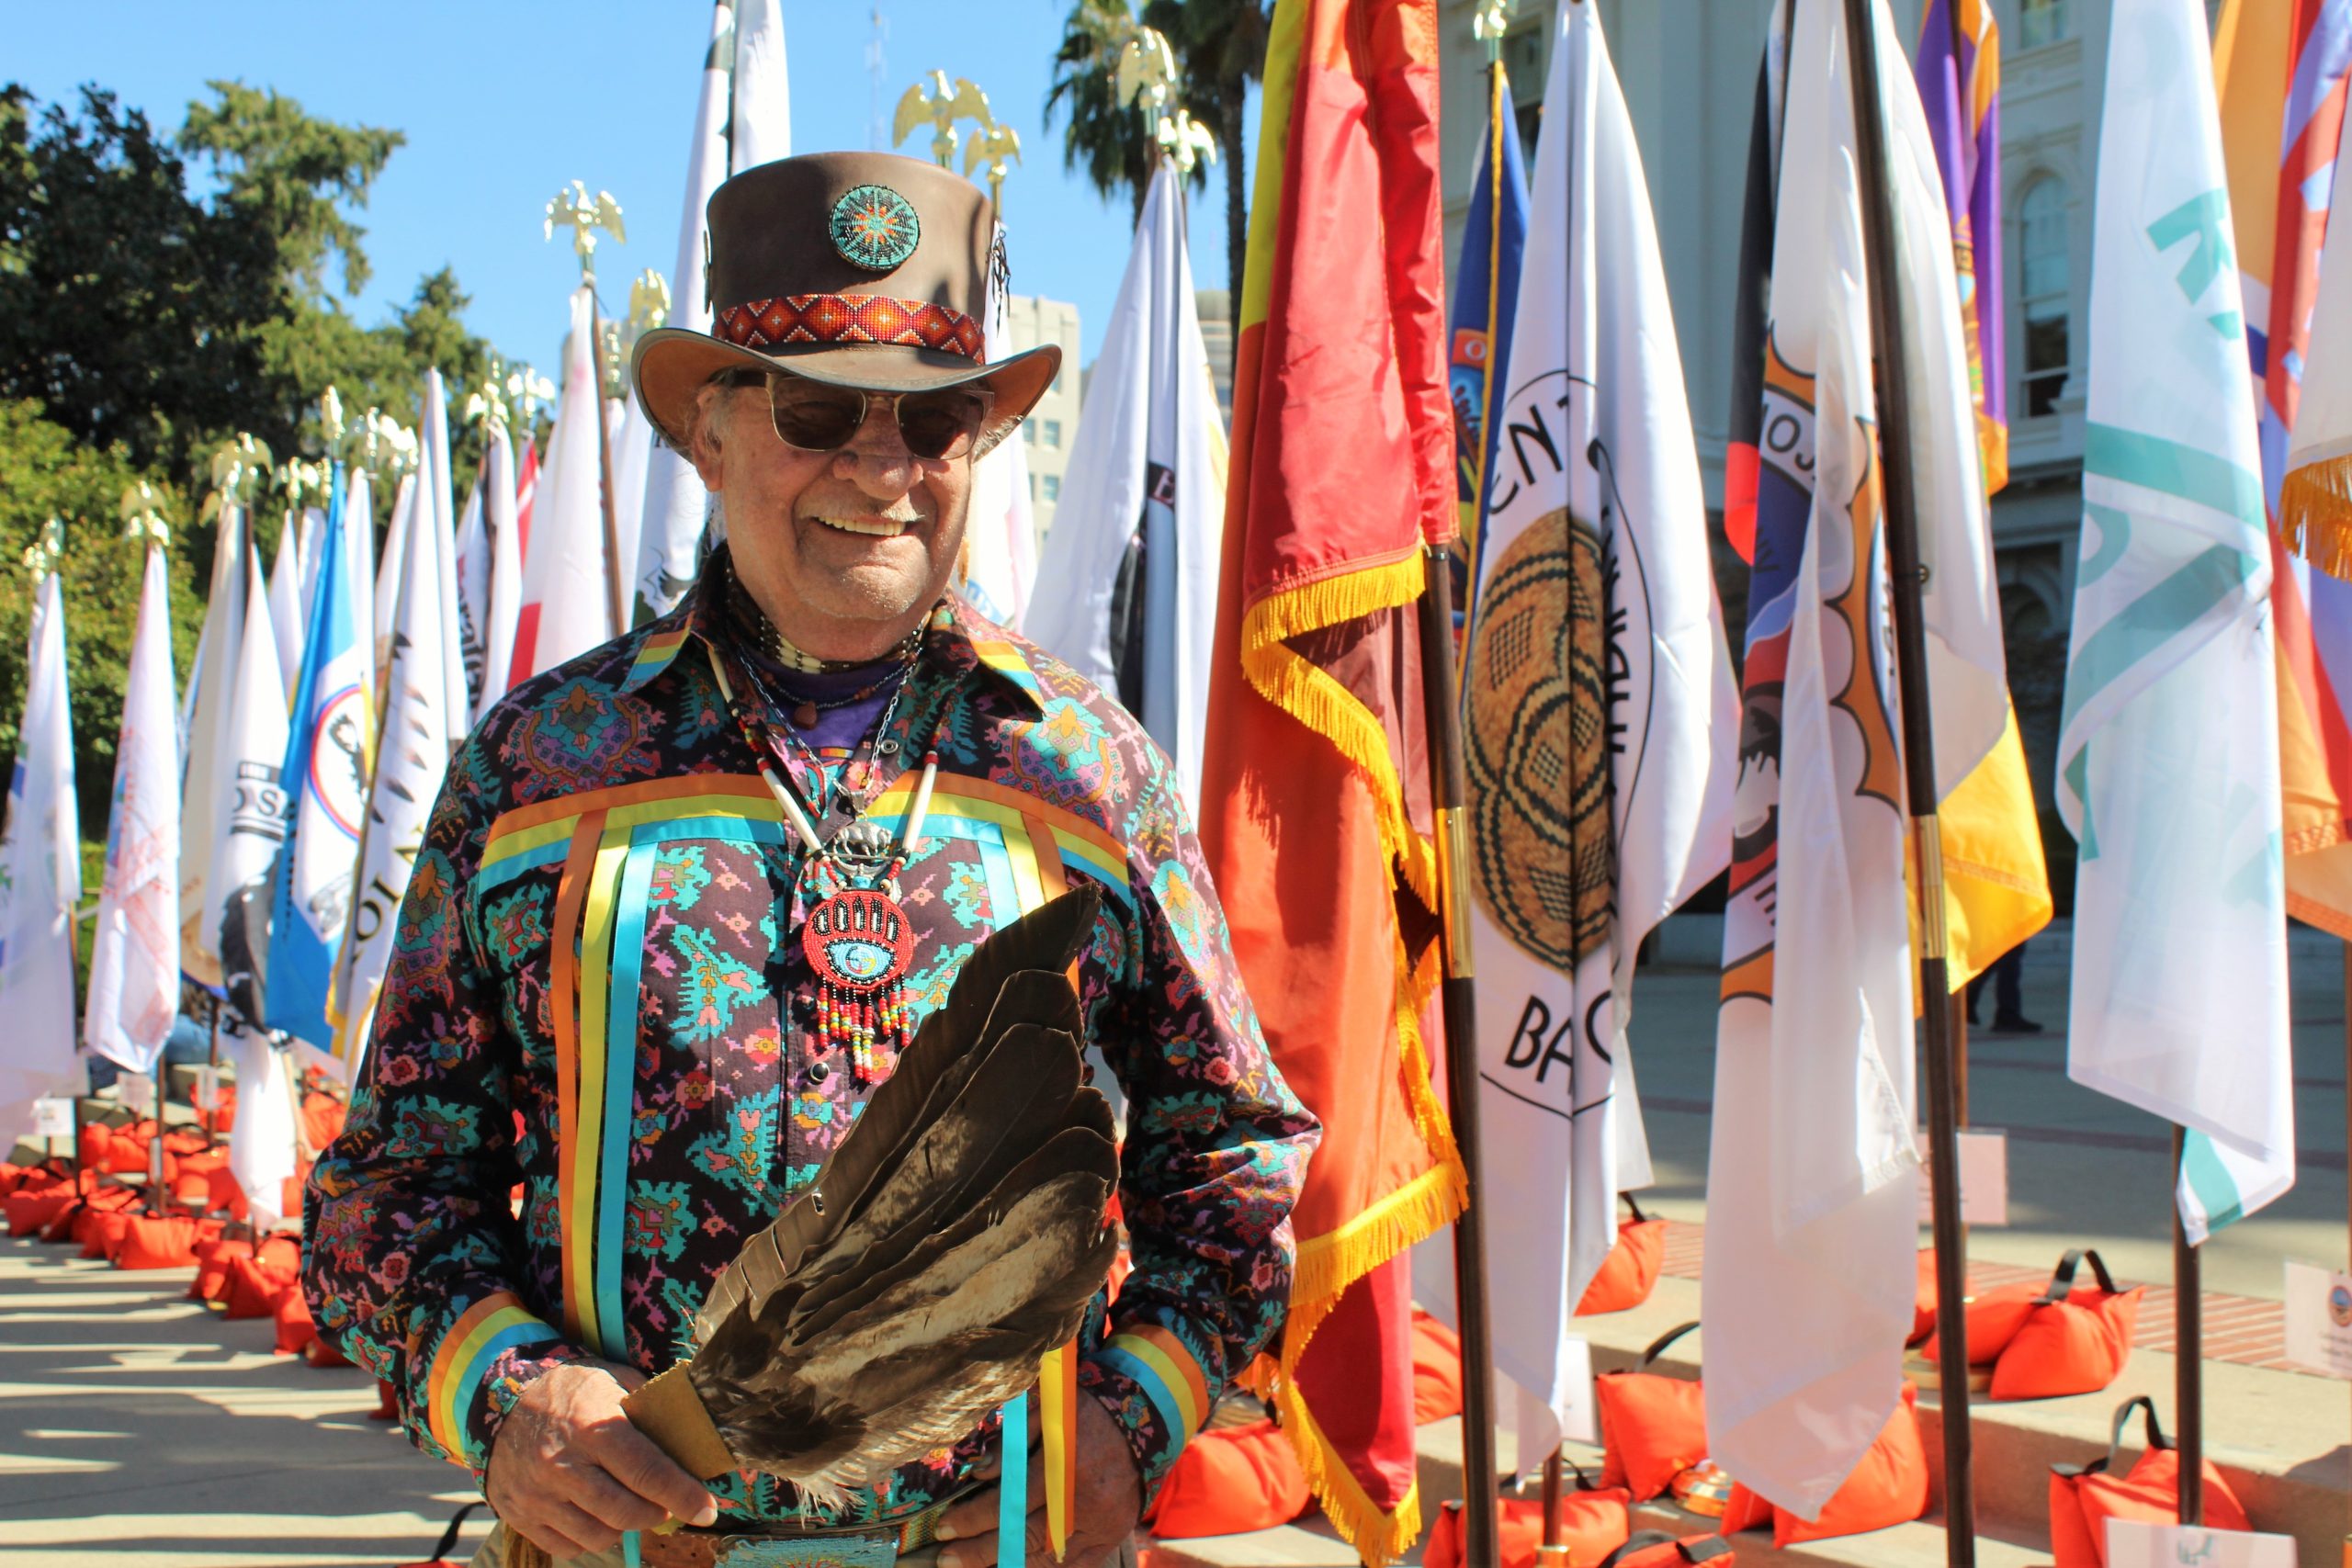 Man in front of Native American tribal flags while holding feathers.